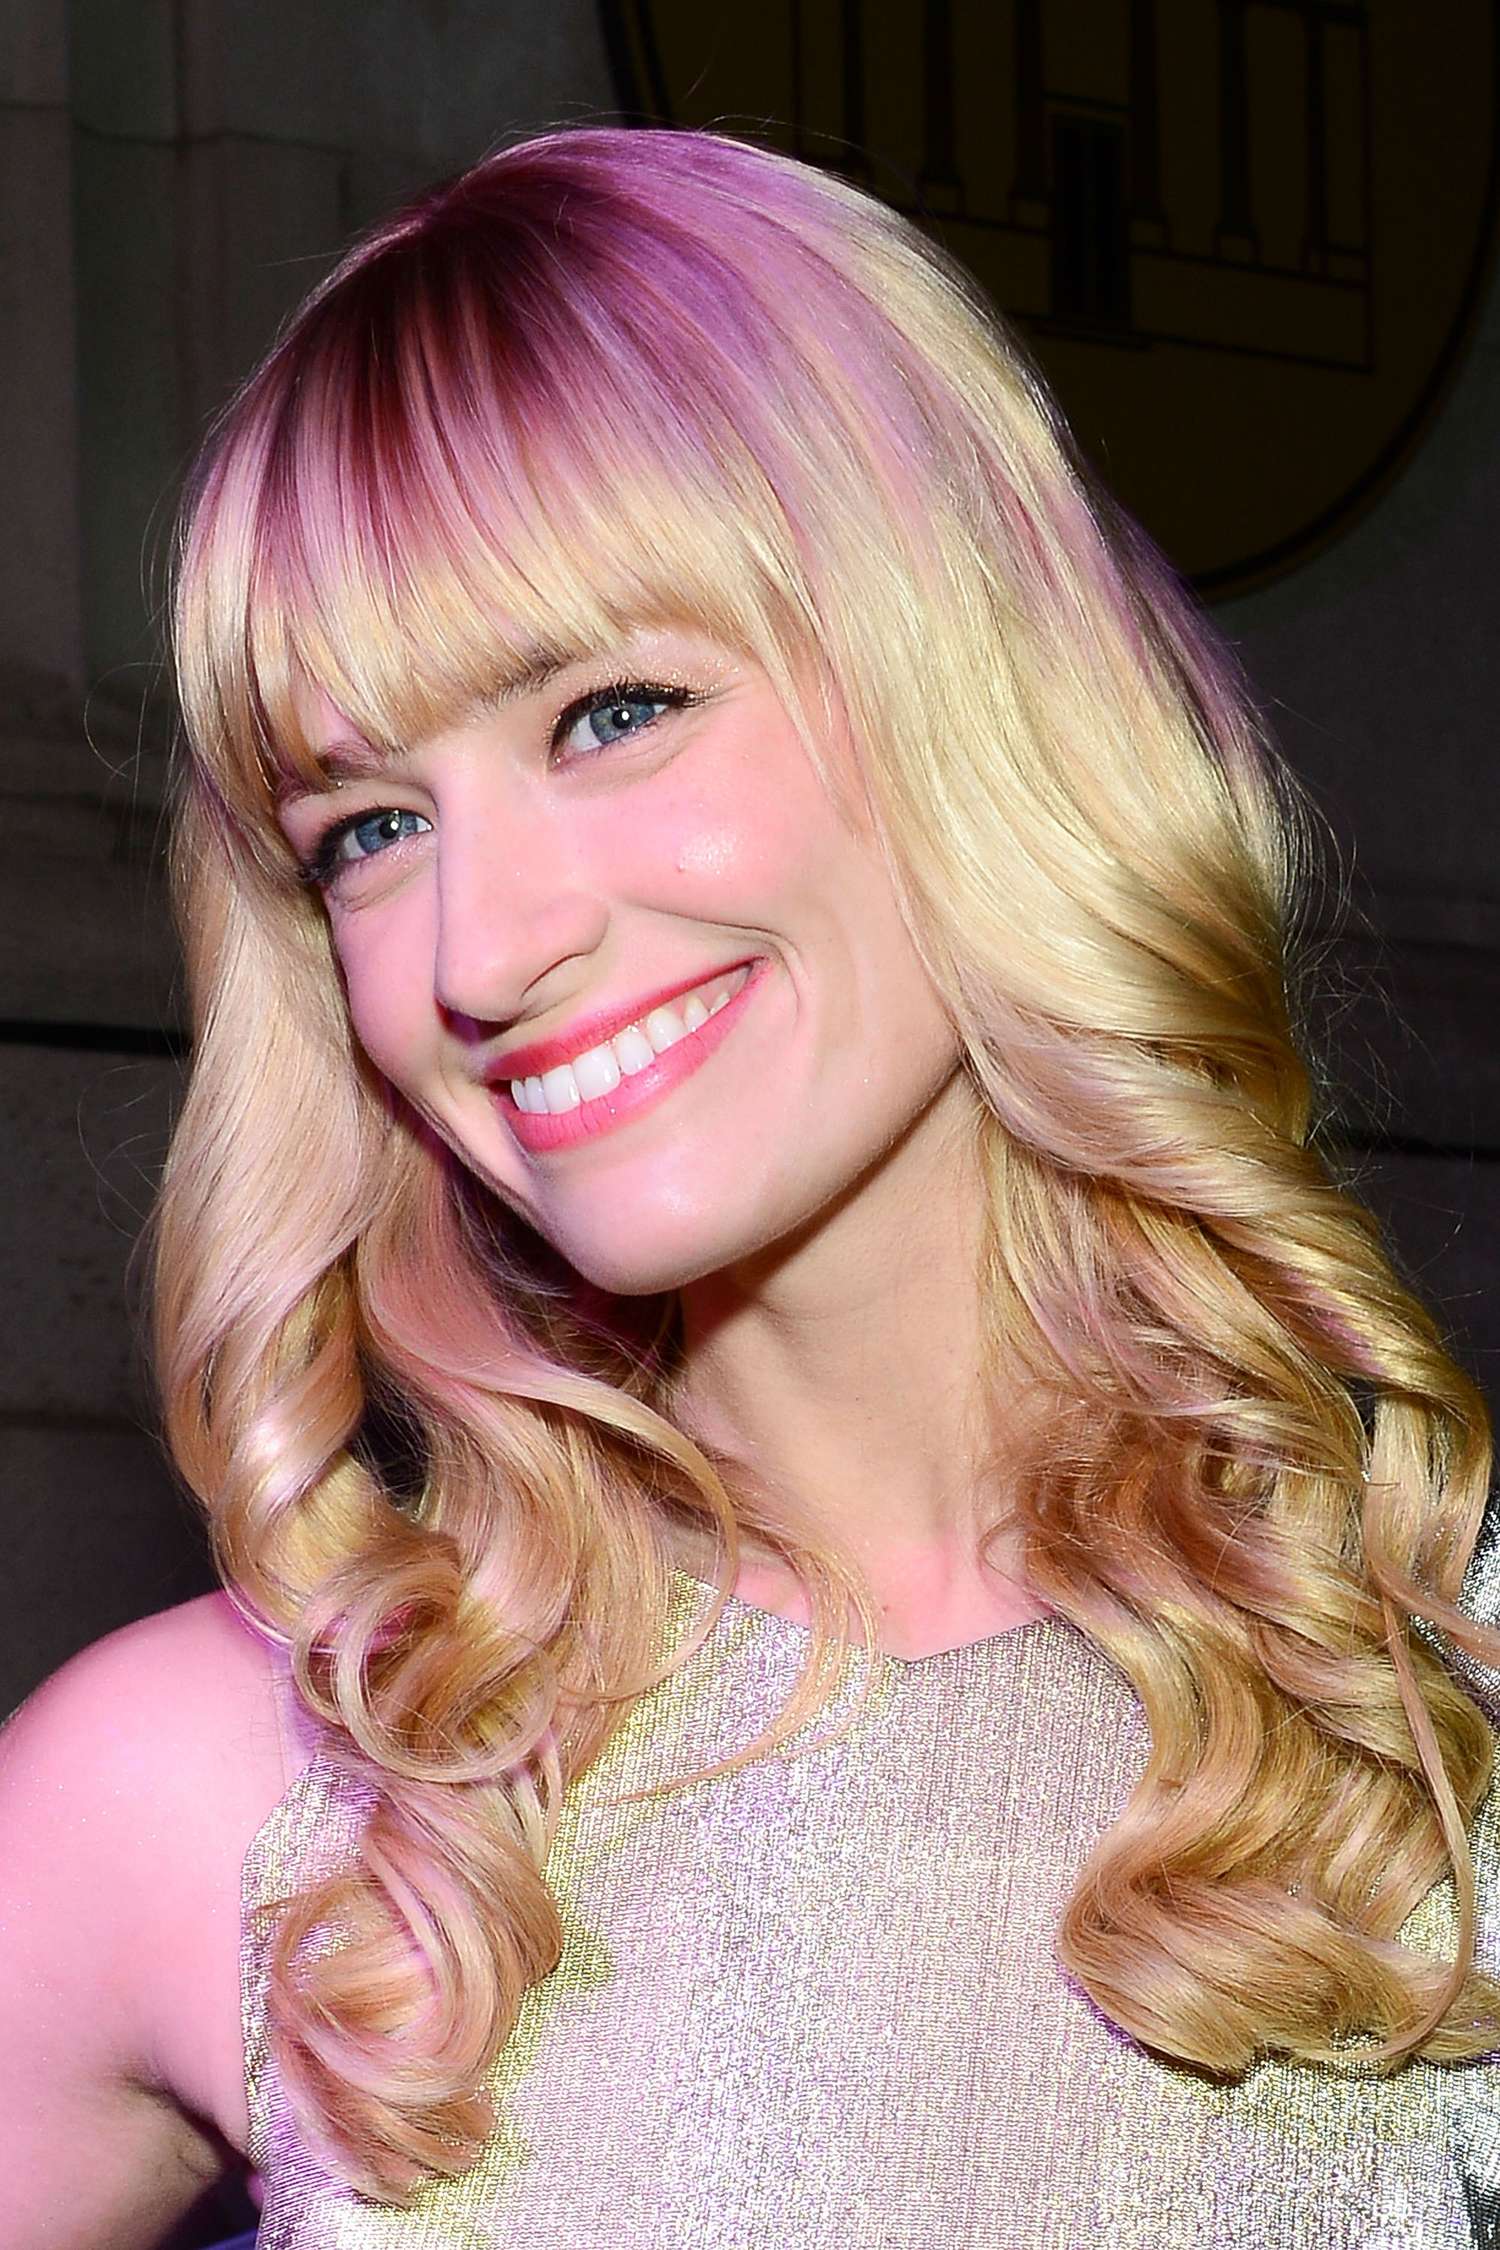 Beth Behrs 2013 : Beth Behrs: 2013 Philadelphia Style Magazine Holiday Cove...